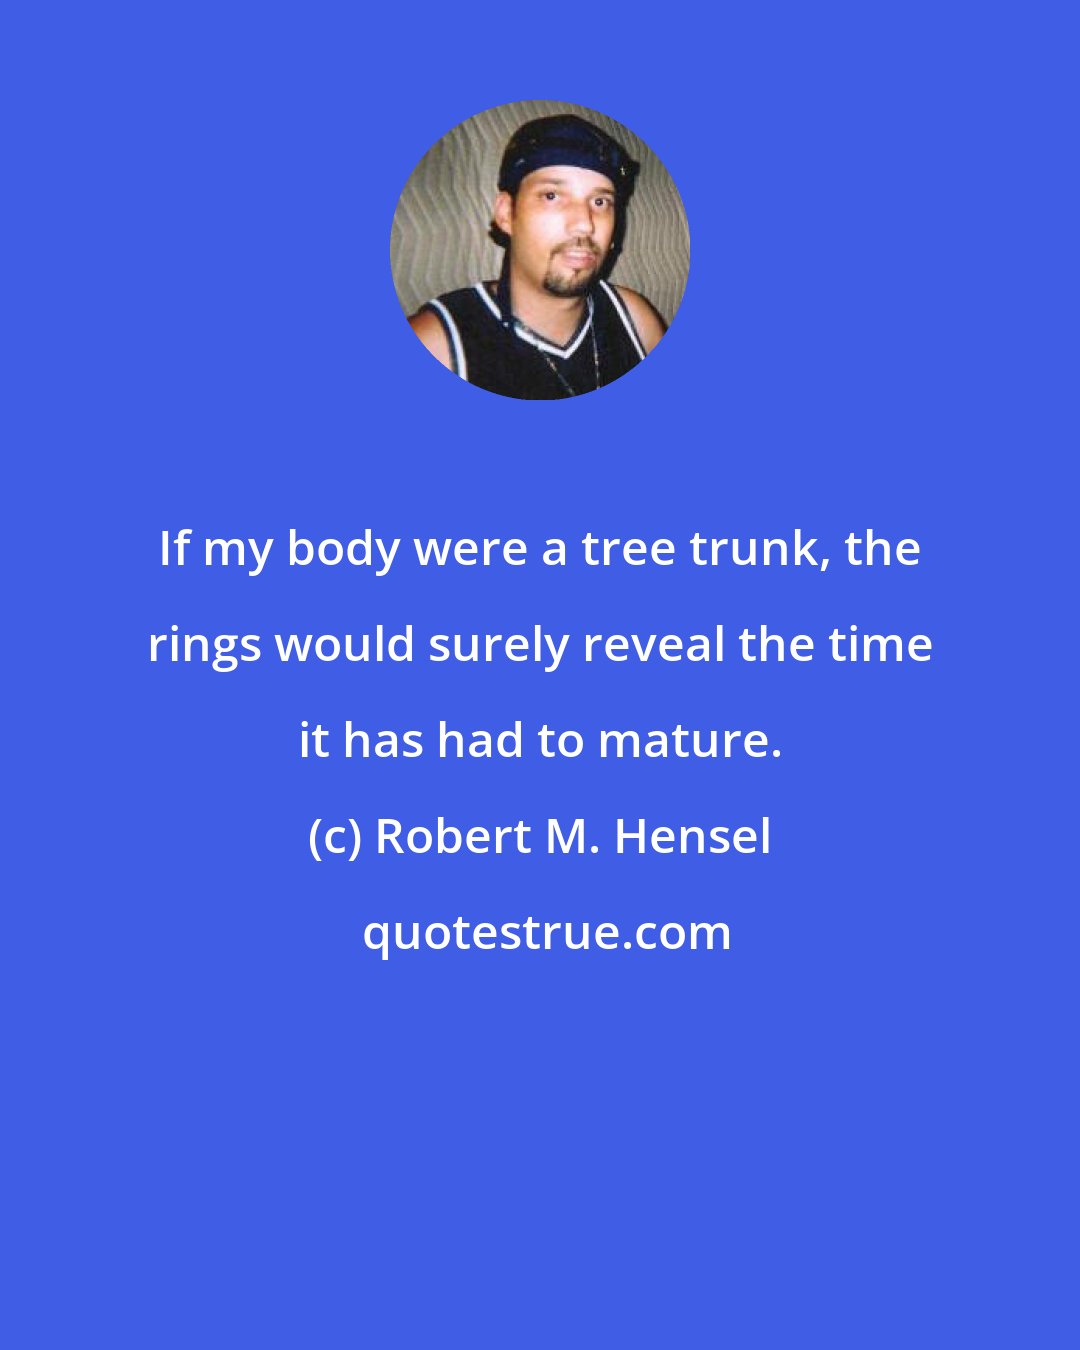 Robert M. Hensel: If my body were a tree trunk, the rings would surely reveal the time it has had to mature.